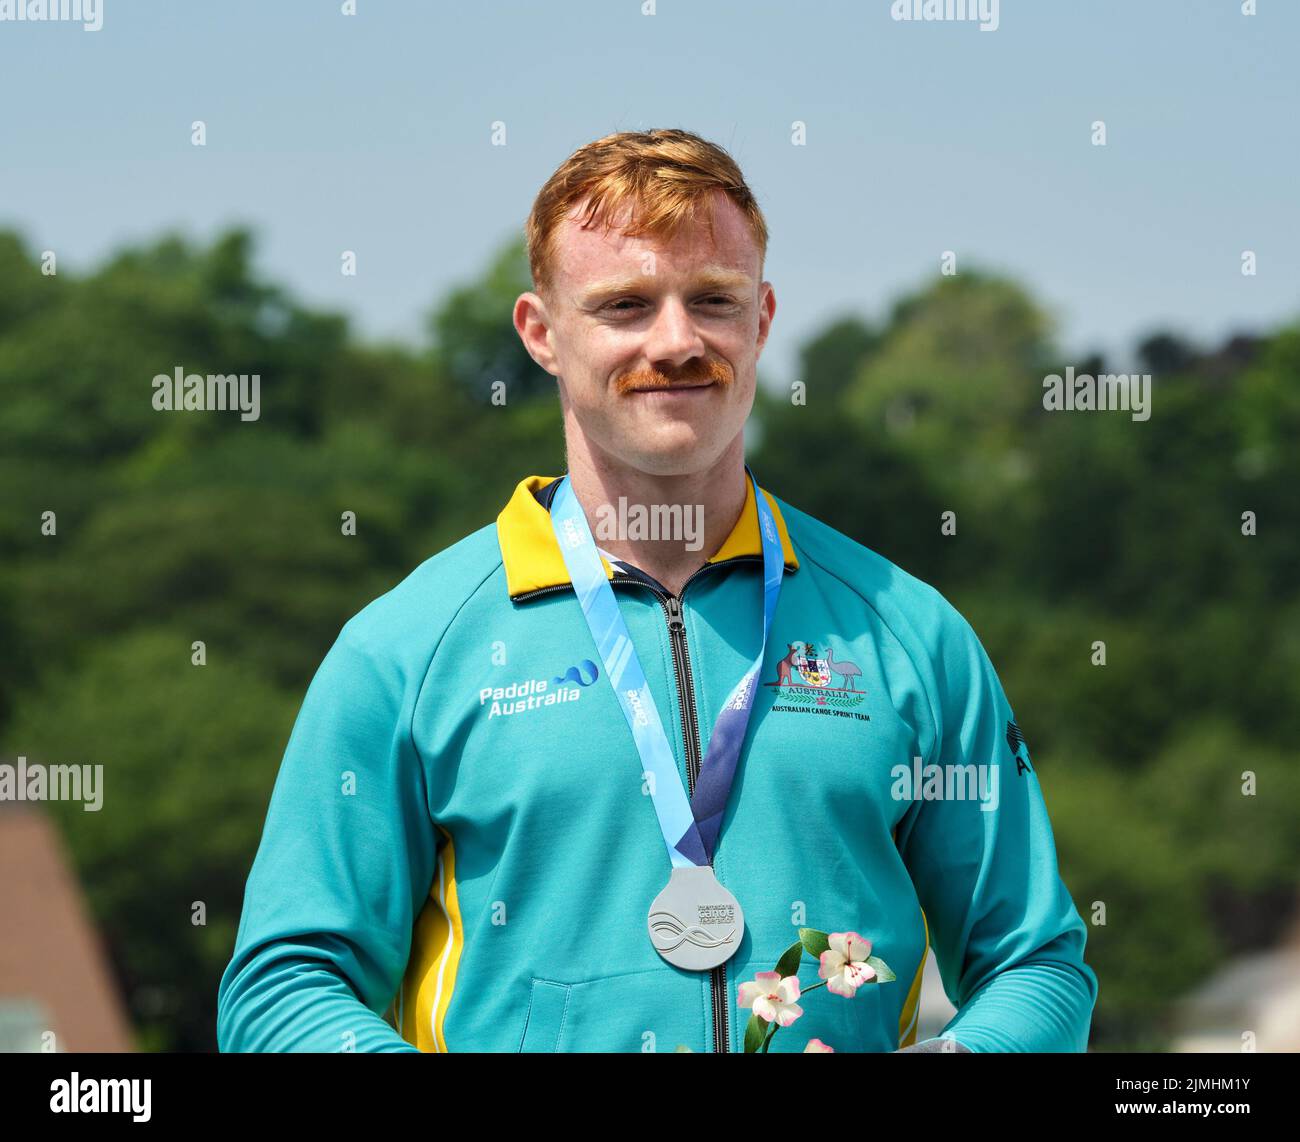 Dartmouth, Canada. August 6th, 2022. Silver Medalist Jean Westhuyzen from Australia on the podium receiving his medal in the K1 Men 500m event. The 2022 ICF Canoe Sprint and Paracanoe World Championships takes place on Lake Banook in Dartmouth (Halifax). Credit: meanderingemu/Alamy Live News Stock Photo